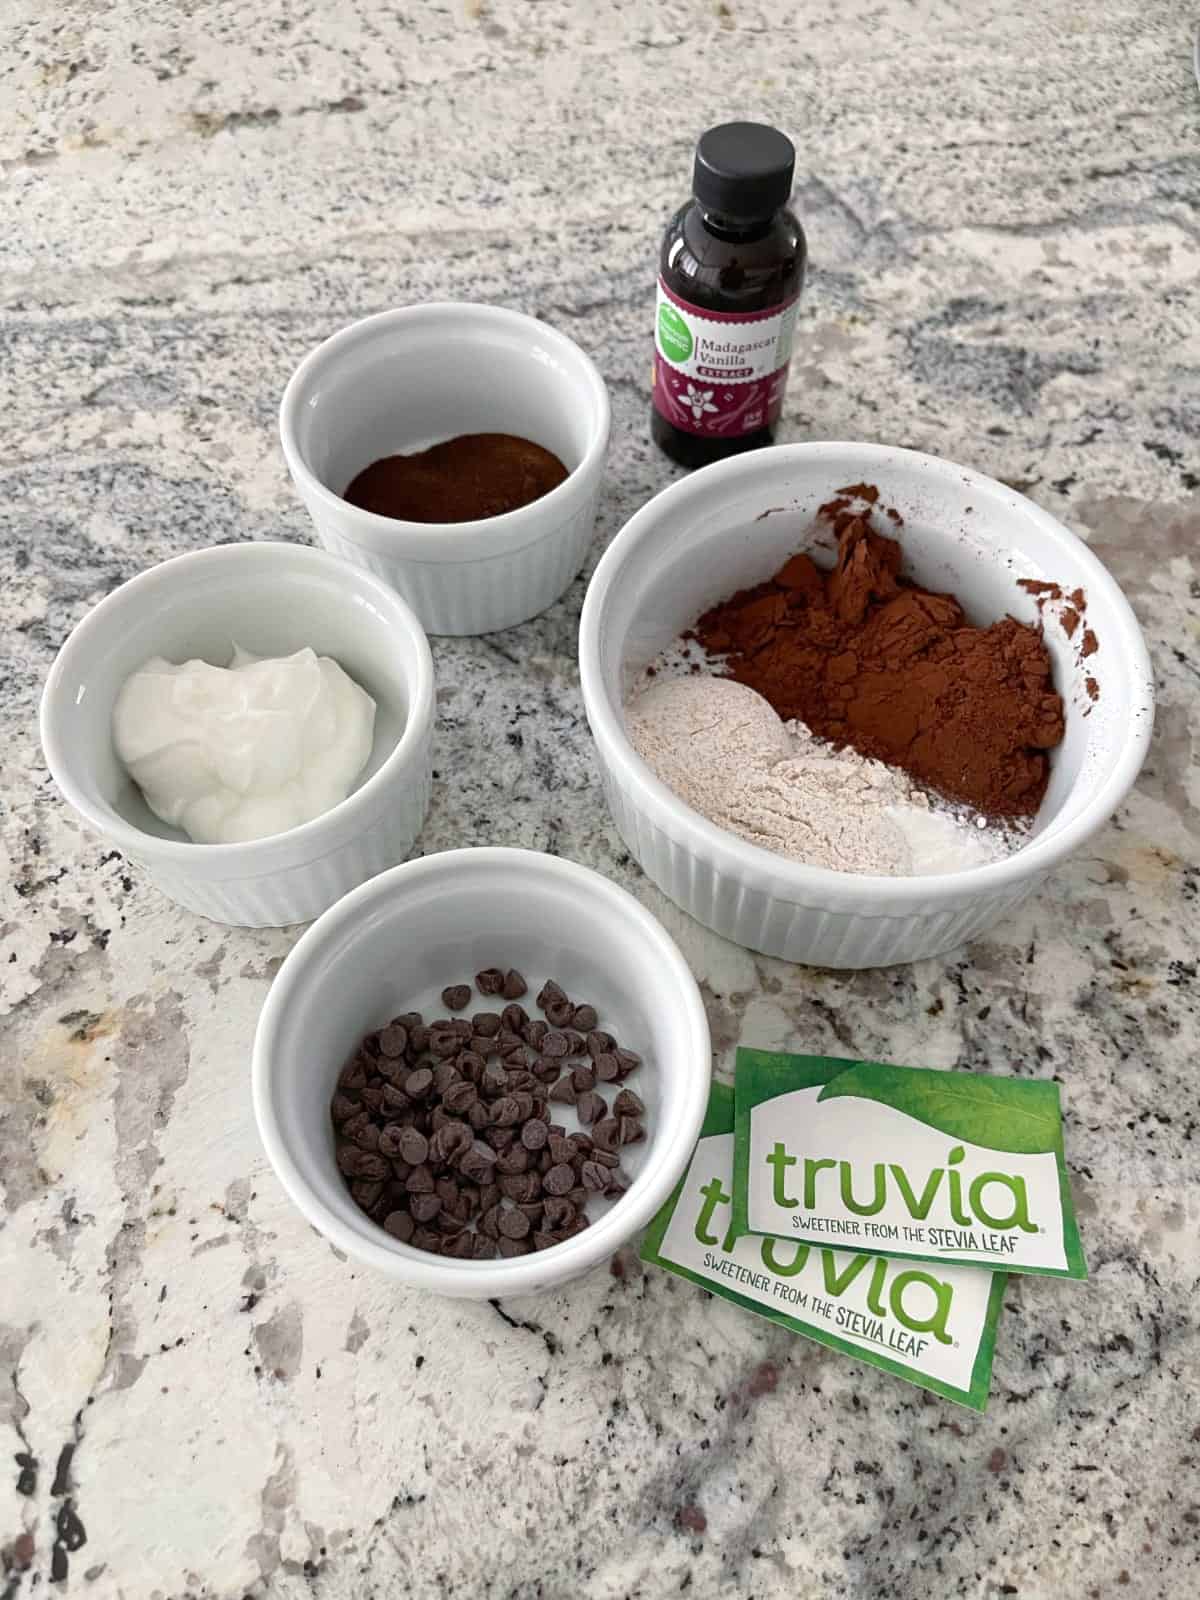 Ingredients including instant coffee powder, vanilla extract, whole wheat flour, dark cocoa powder, Greek yogurt, mini chocolate chips and Truvia packets.